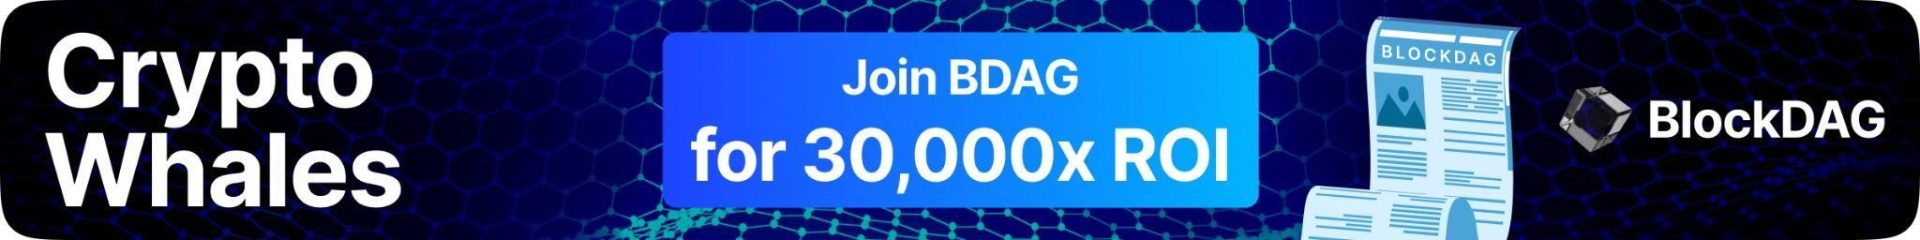 BlockDAG: Leading The $600 Million Charge With Sustainable Blockchain Technology Over BNB Smart Chain And Fantom